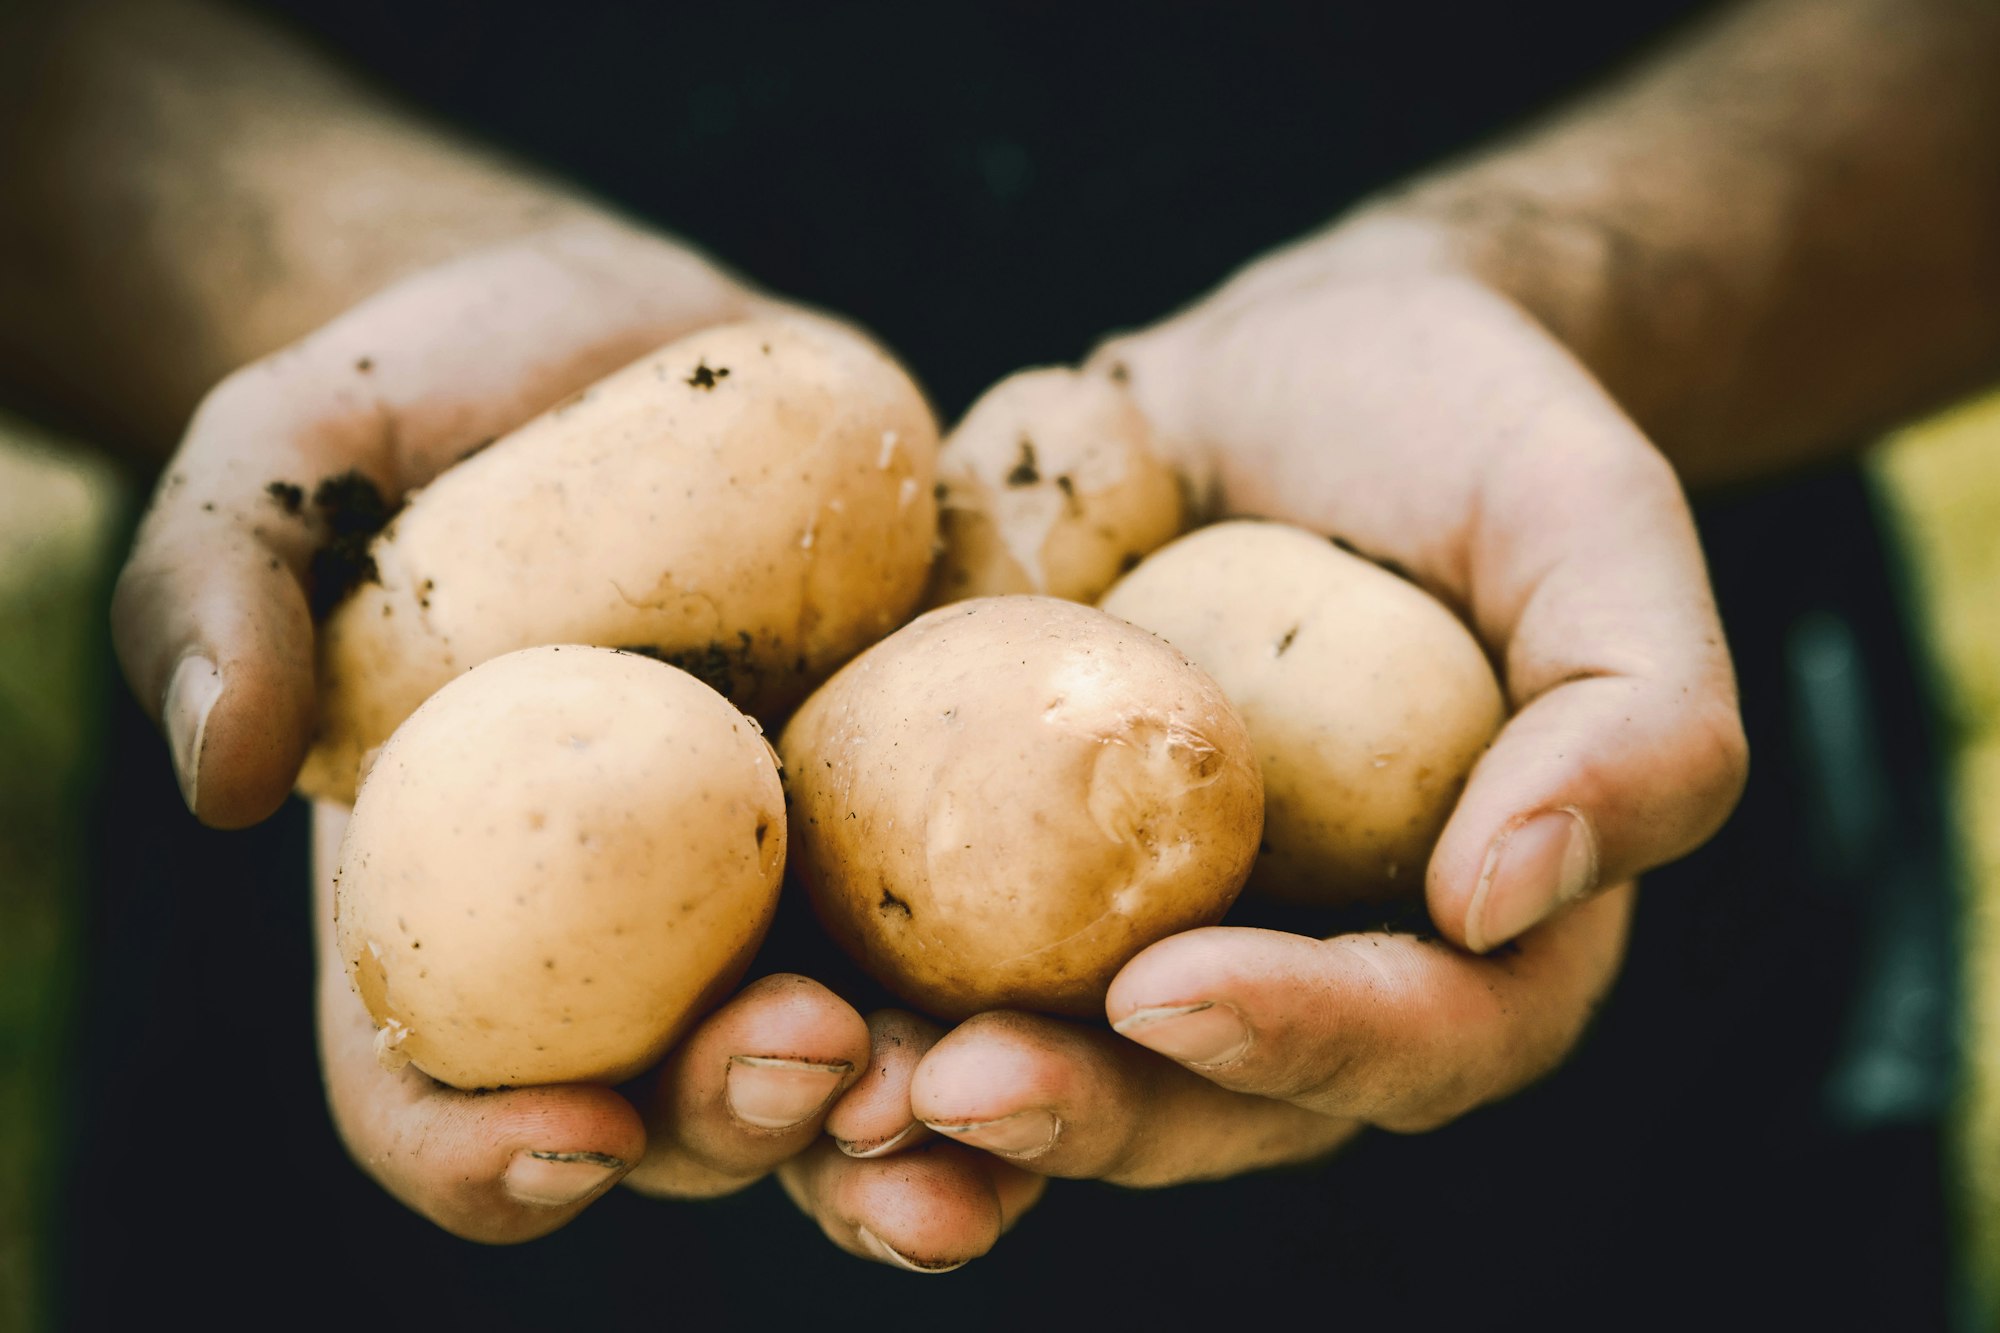 Farmers hands with freshly harvested vegetables. Fresh bio potatoes